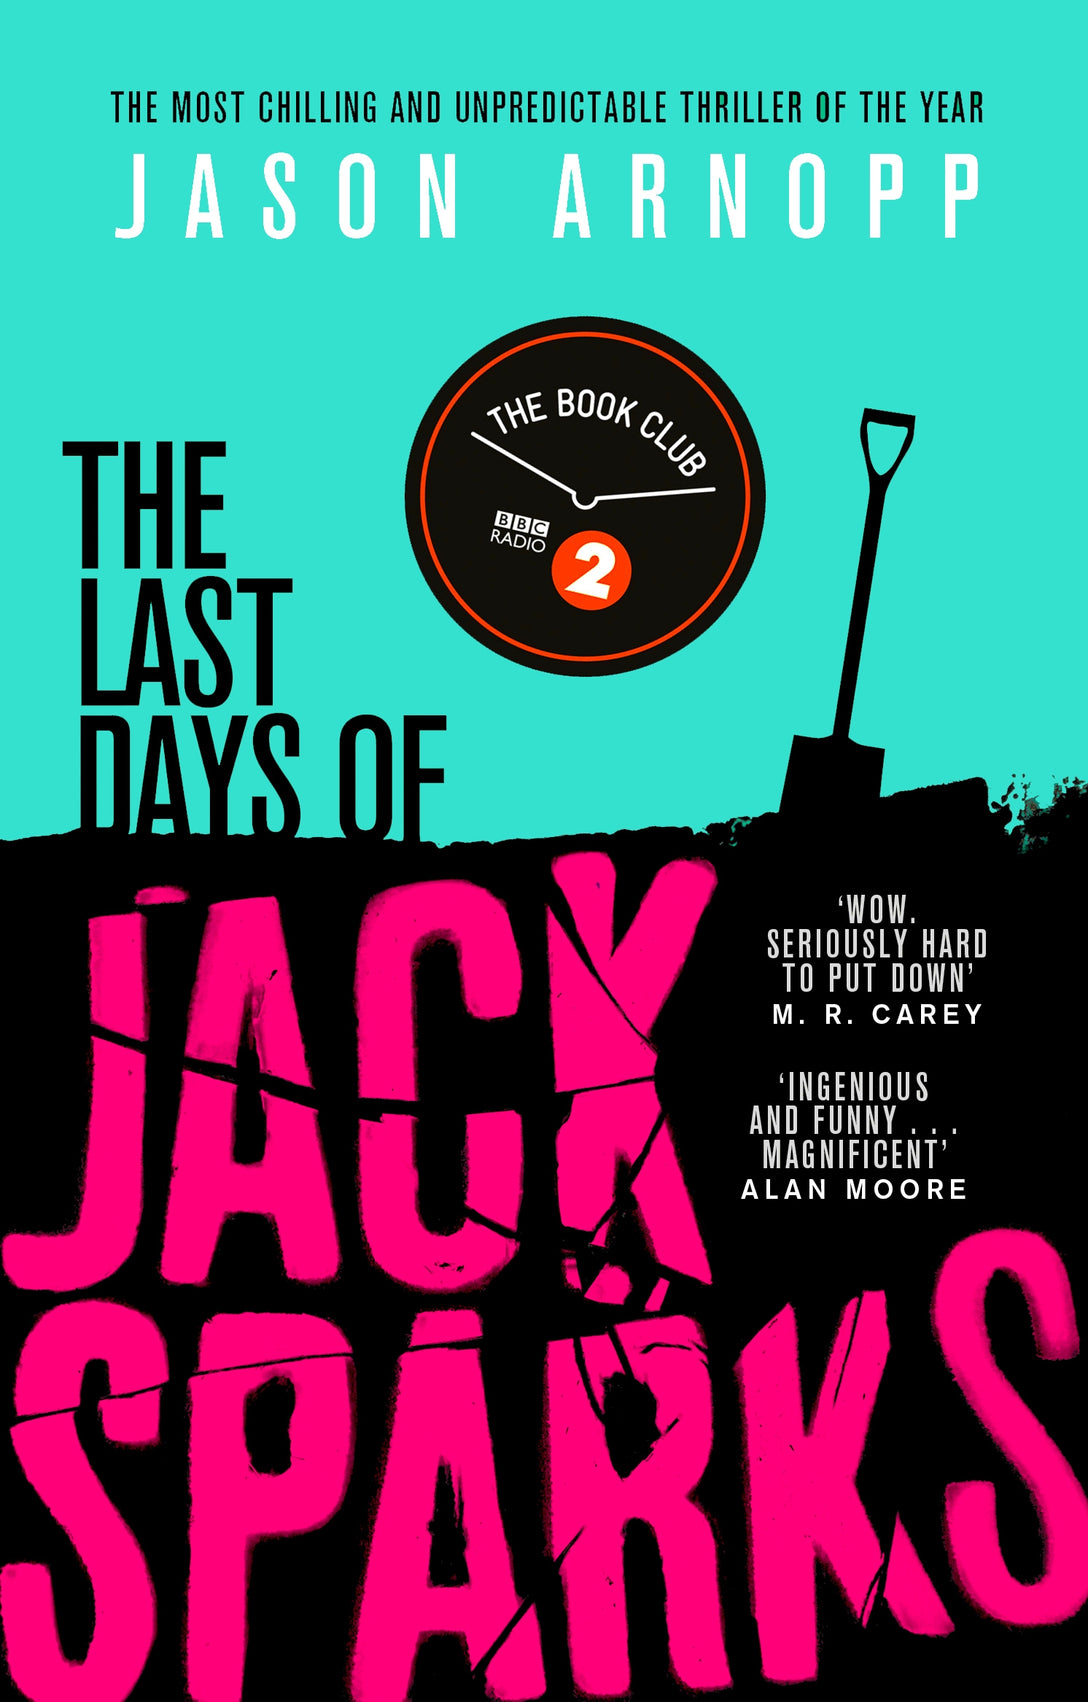 The Last Days of Jack Sparks by Jason Arnopp